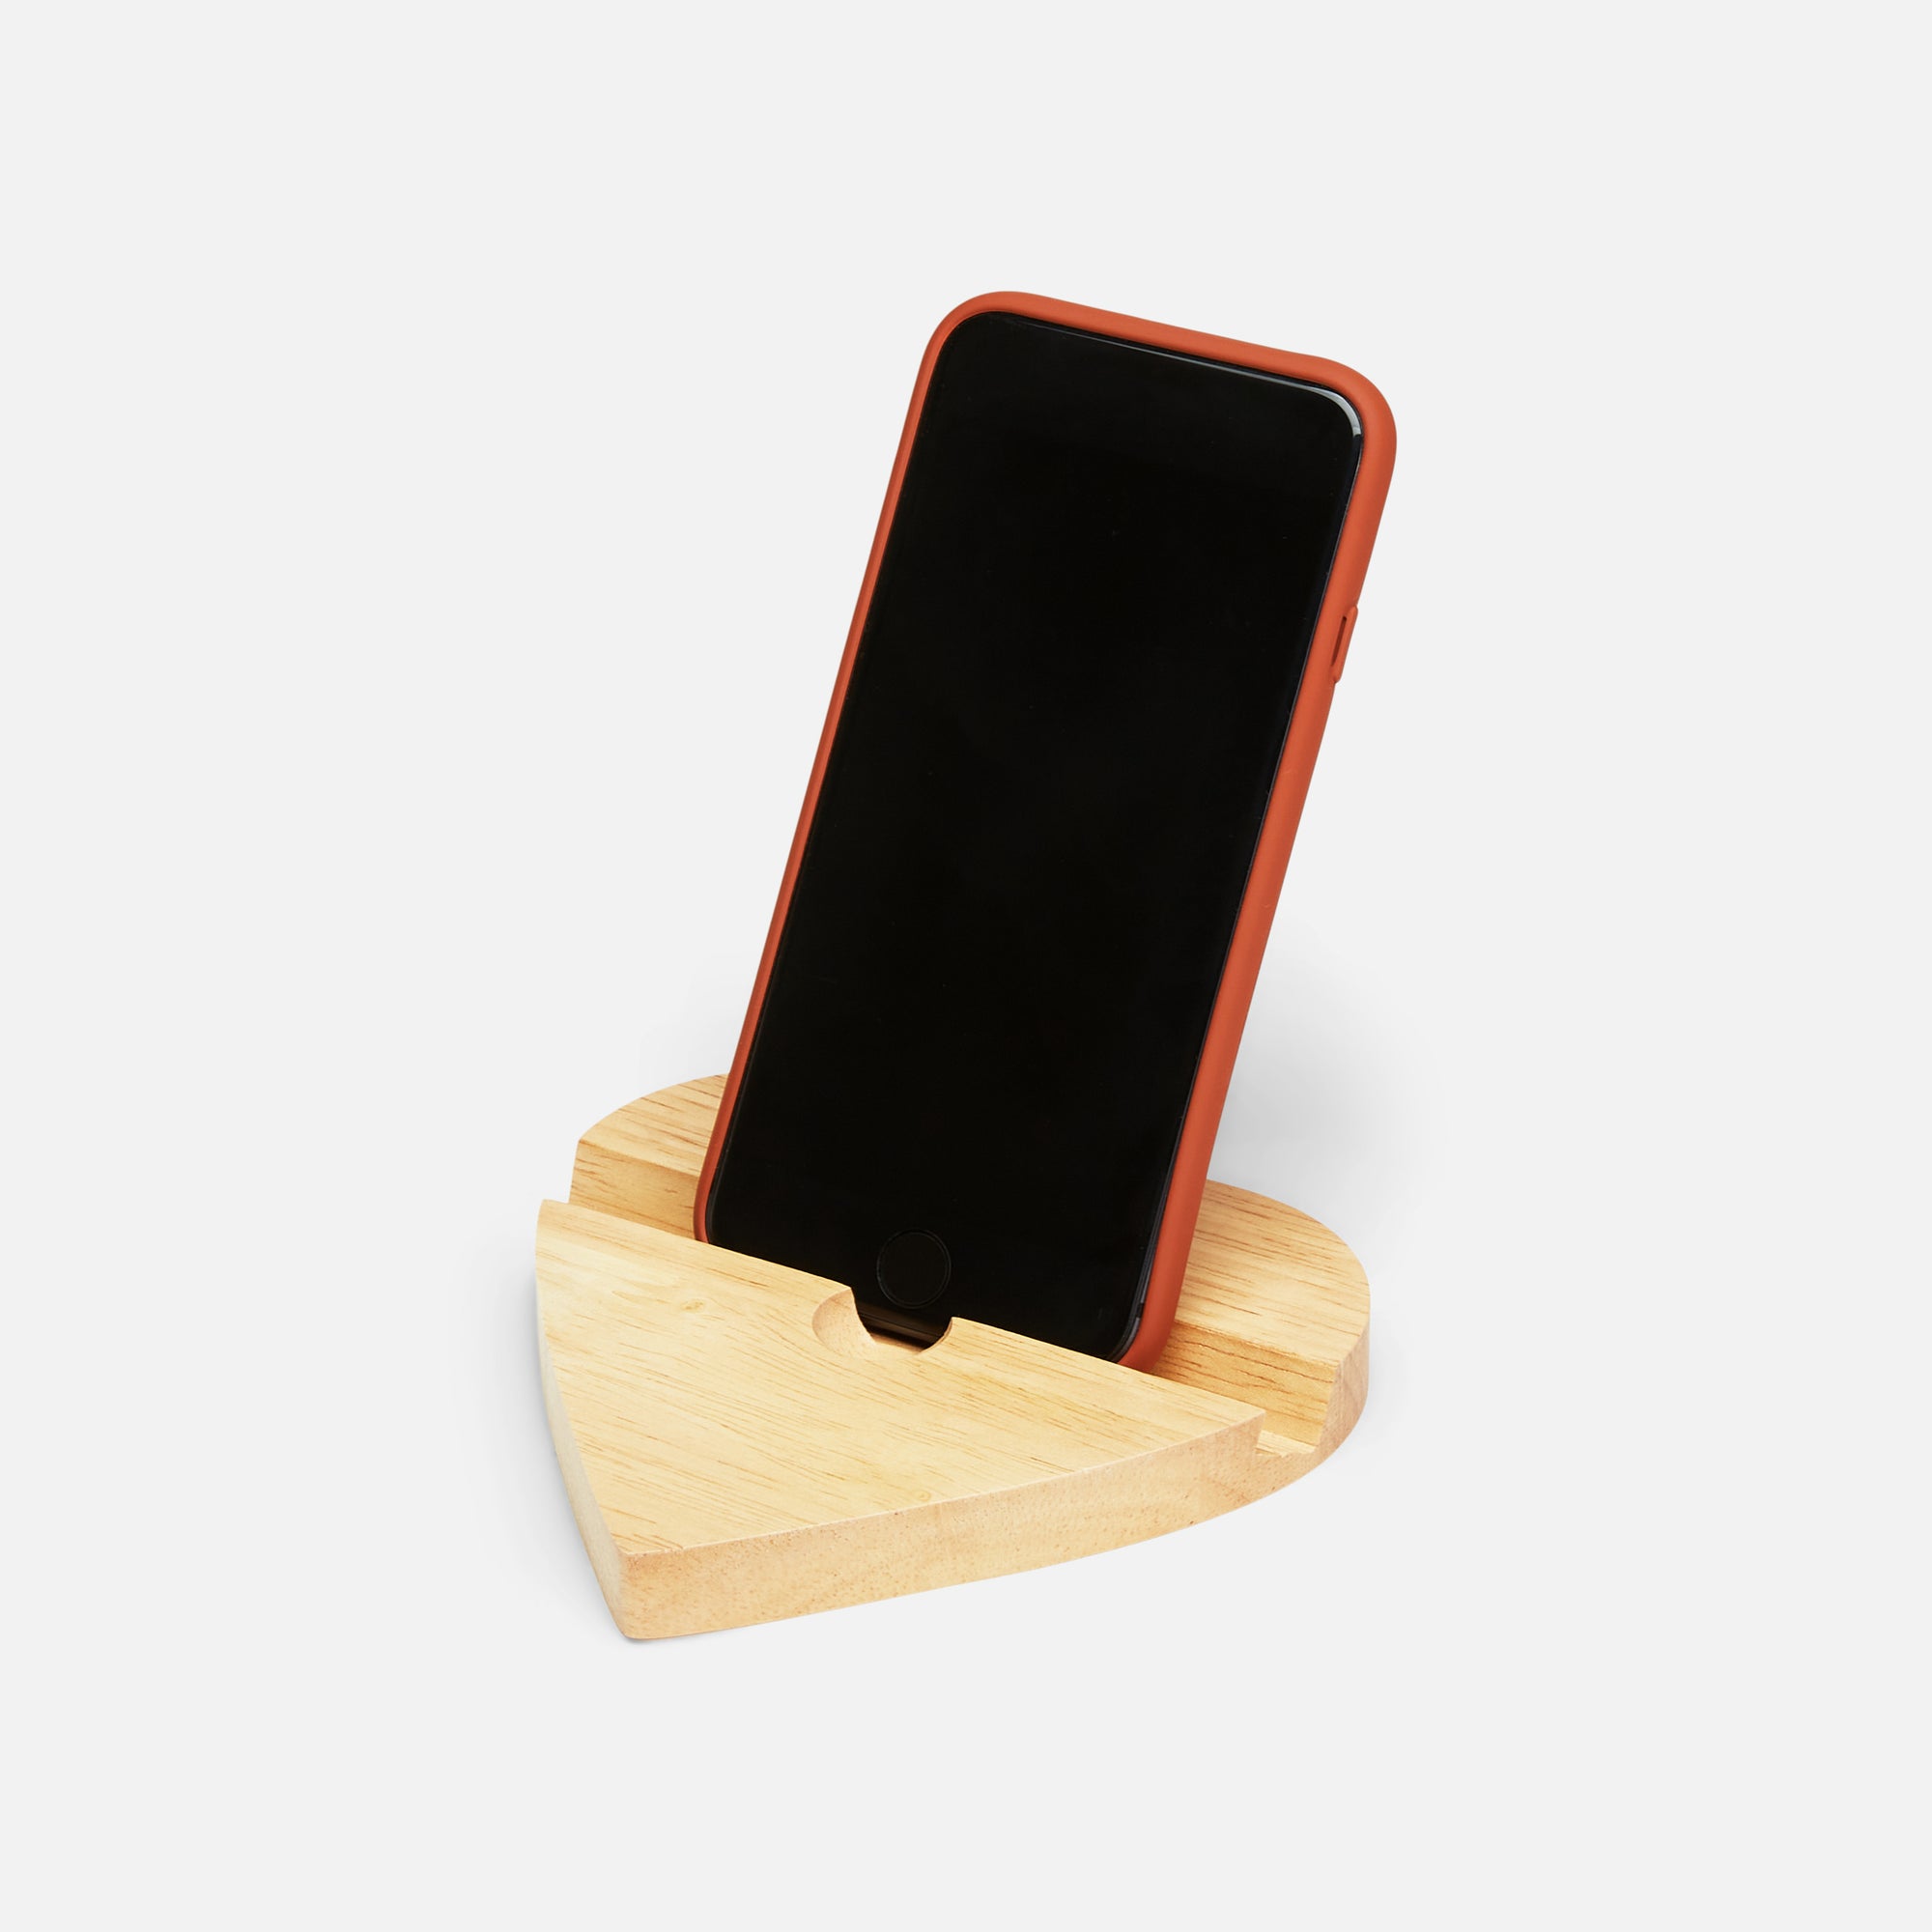 Wooden heart shaped phone stand